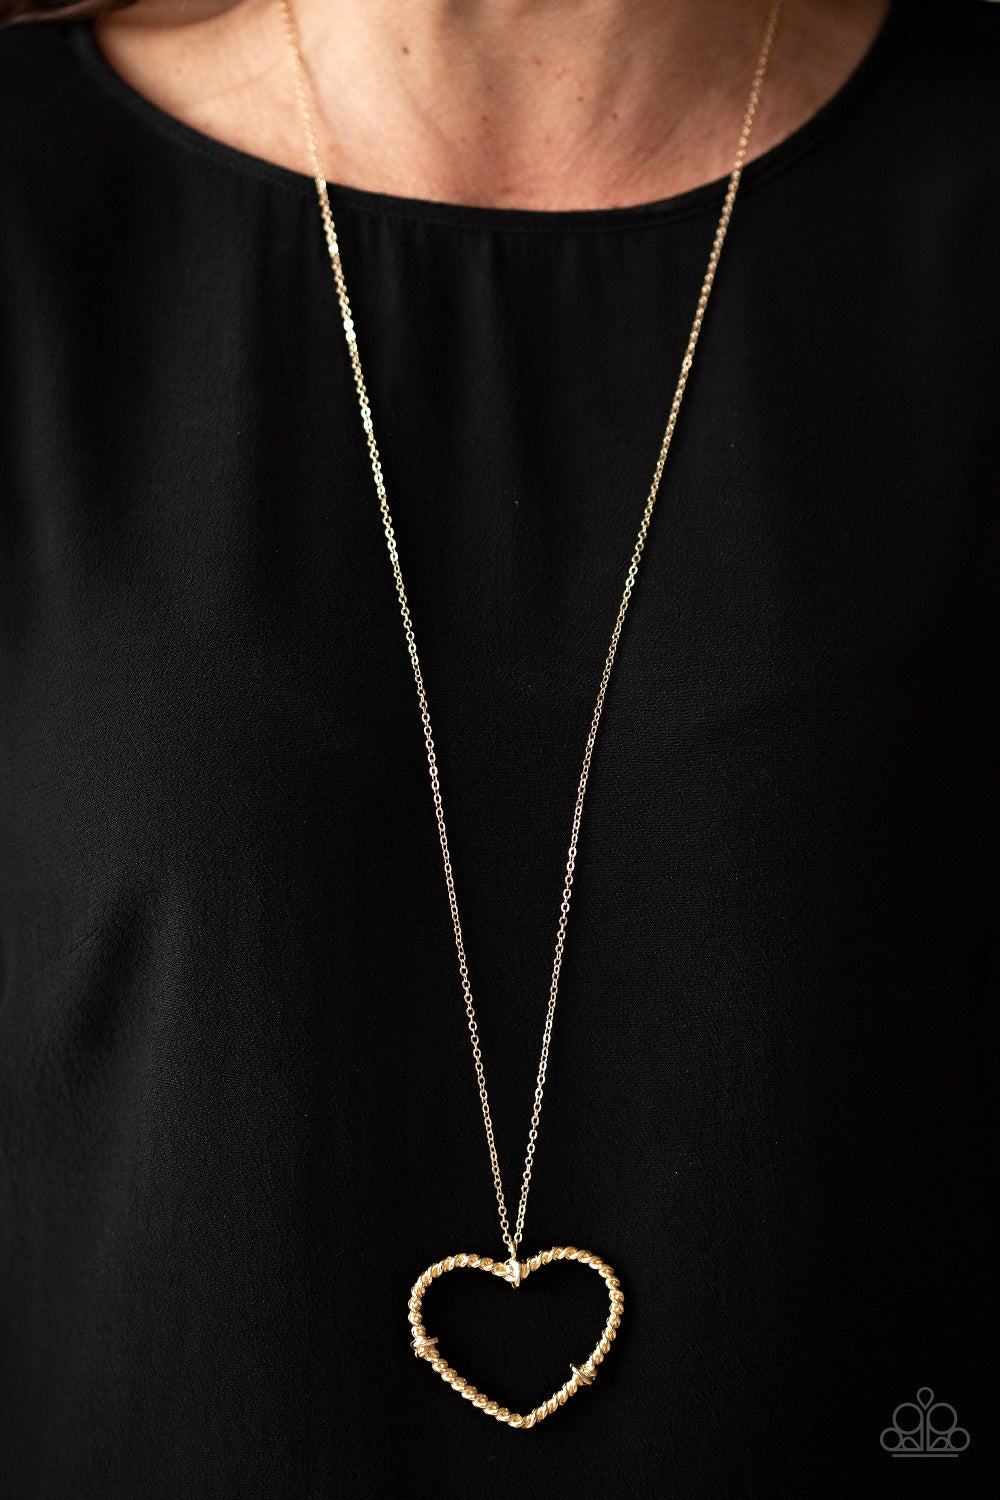 Paparazzi necklace - Straight From The Heart - Gold